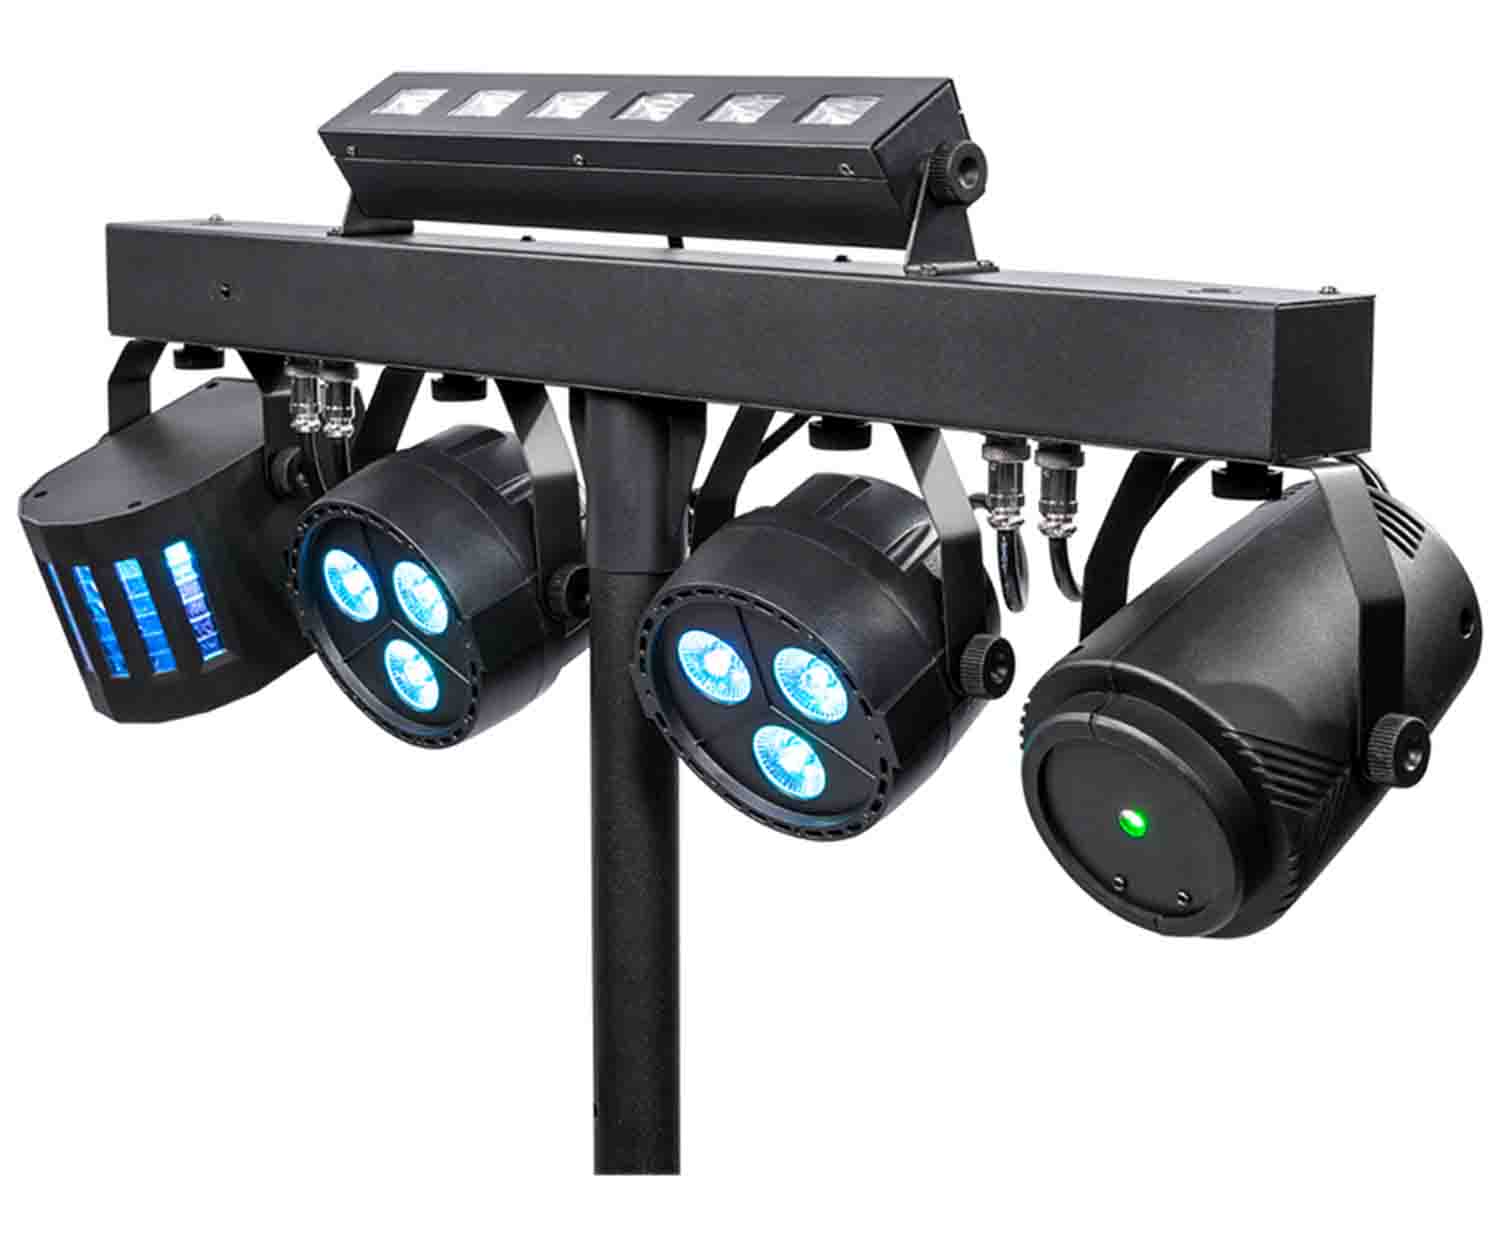 B-Stock: ColorKey CKU-3030 PartyBar FX Multi Effect Professional Lighting Package - Hollywood DJ